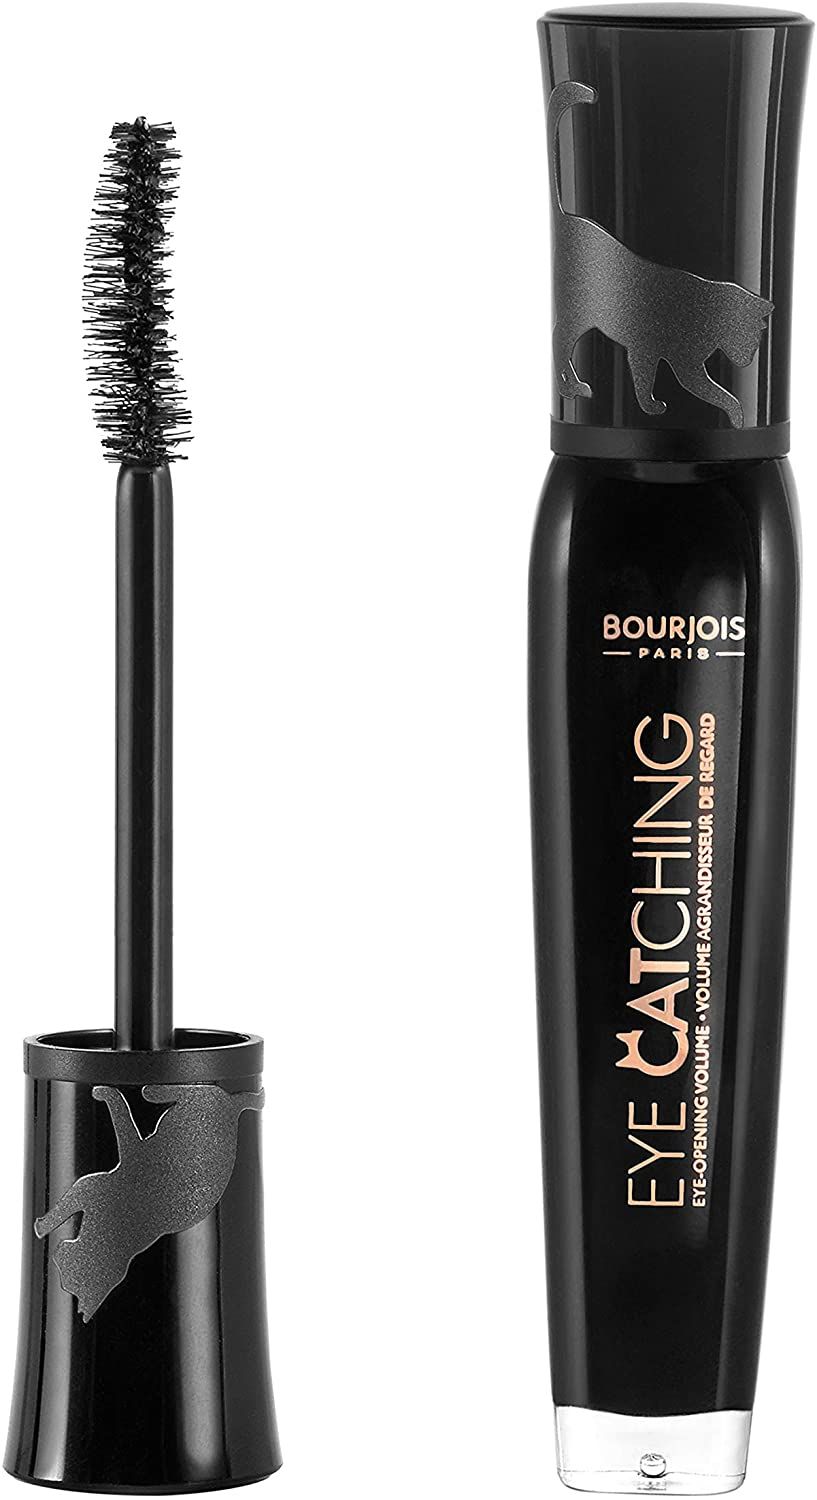 Bourjois Eye Catching Eye-Opening Volume Mascara covers each lash to create a wide-eyed, cat eye effect. Equipped with a curved brush for grabbing even hard-to-reach corner lashes. This volumising mascara enhances and defines to leave lashes looking thicker and more defined.